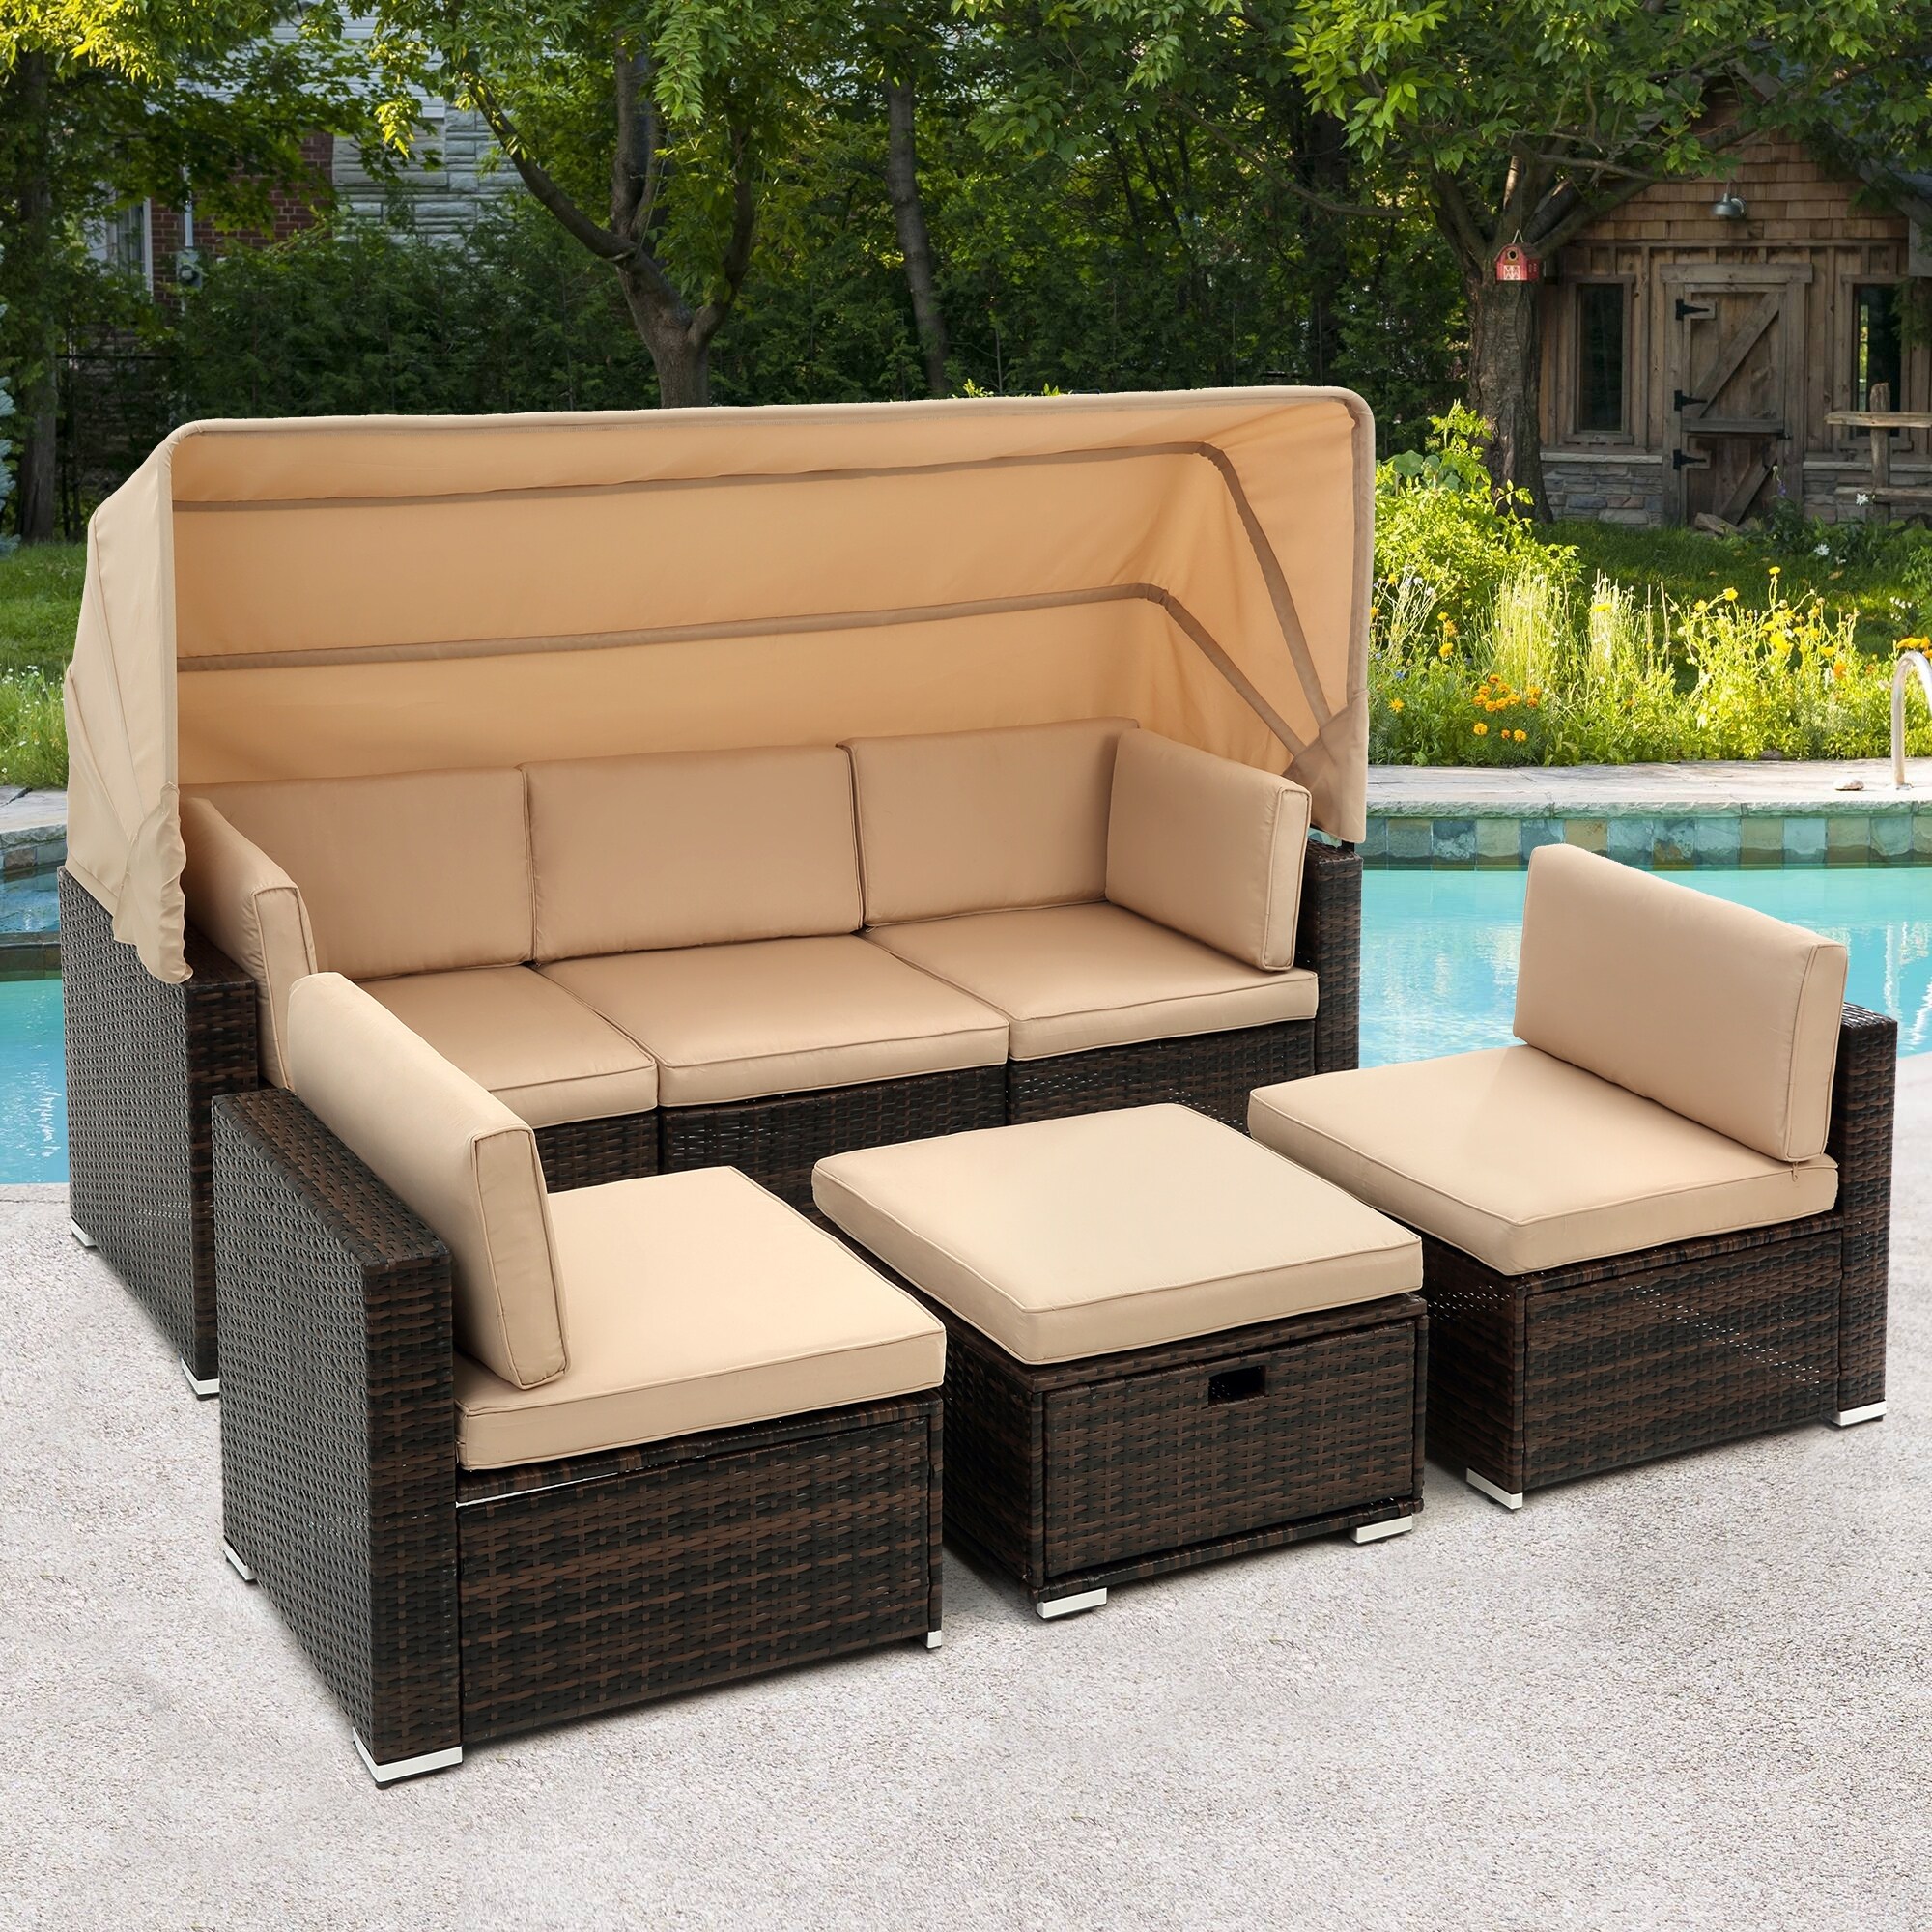 Outdoor Rattan Sofa Set With Steel Frame And Roof  Wholesale Pool Furniture With Chaise  Metal Chairs  And Sectional Sofas